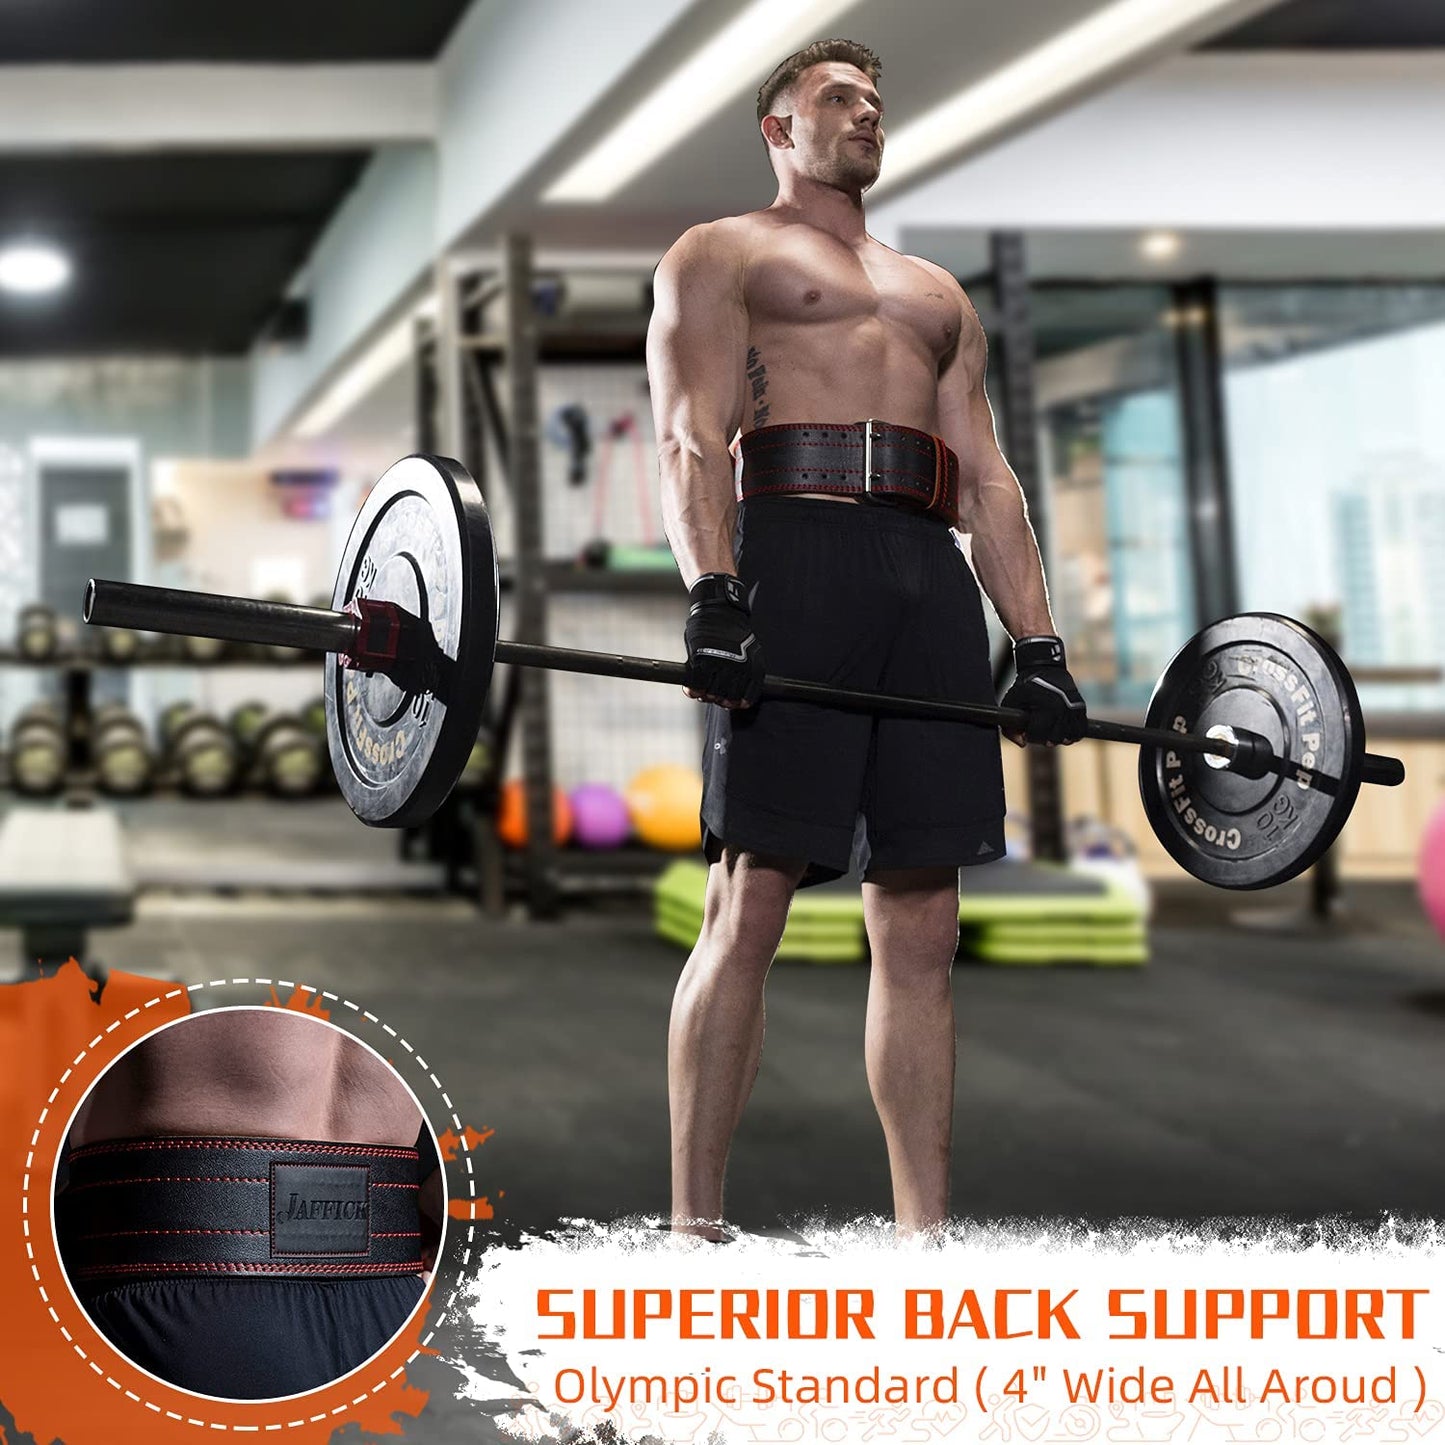 Weight Lifting Belt for 7MM Leather Pro Power Gym Belt Heavy Duty 4 Inch Wide Strong Stabilizing Back Support for Men Women Deadlifts Squats Powerlifting Strength Training Athletes